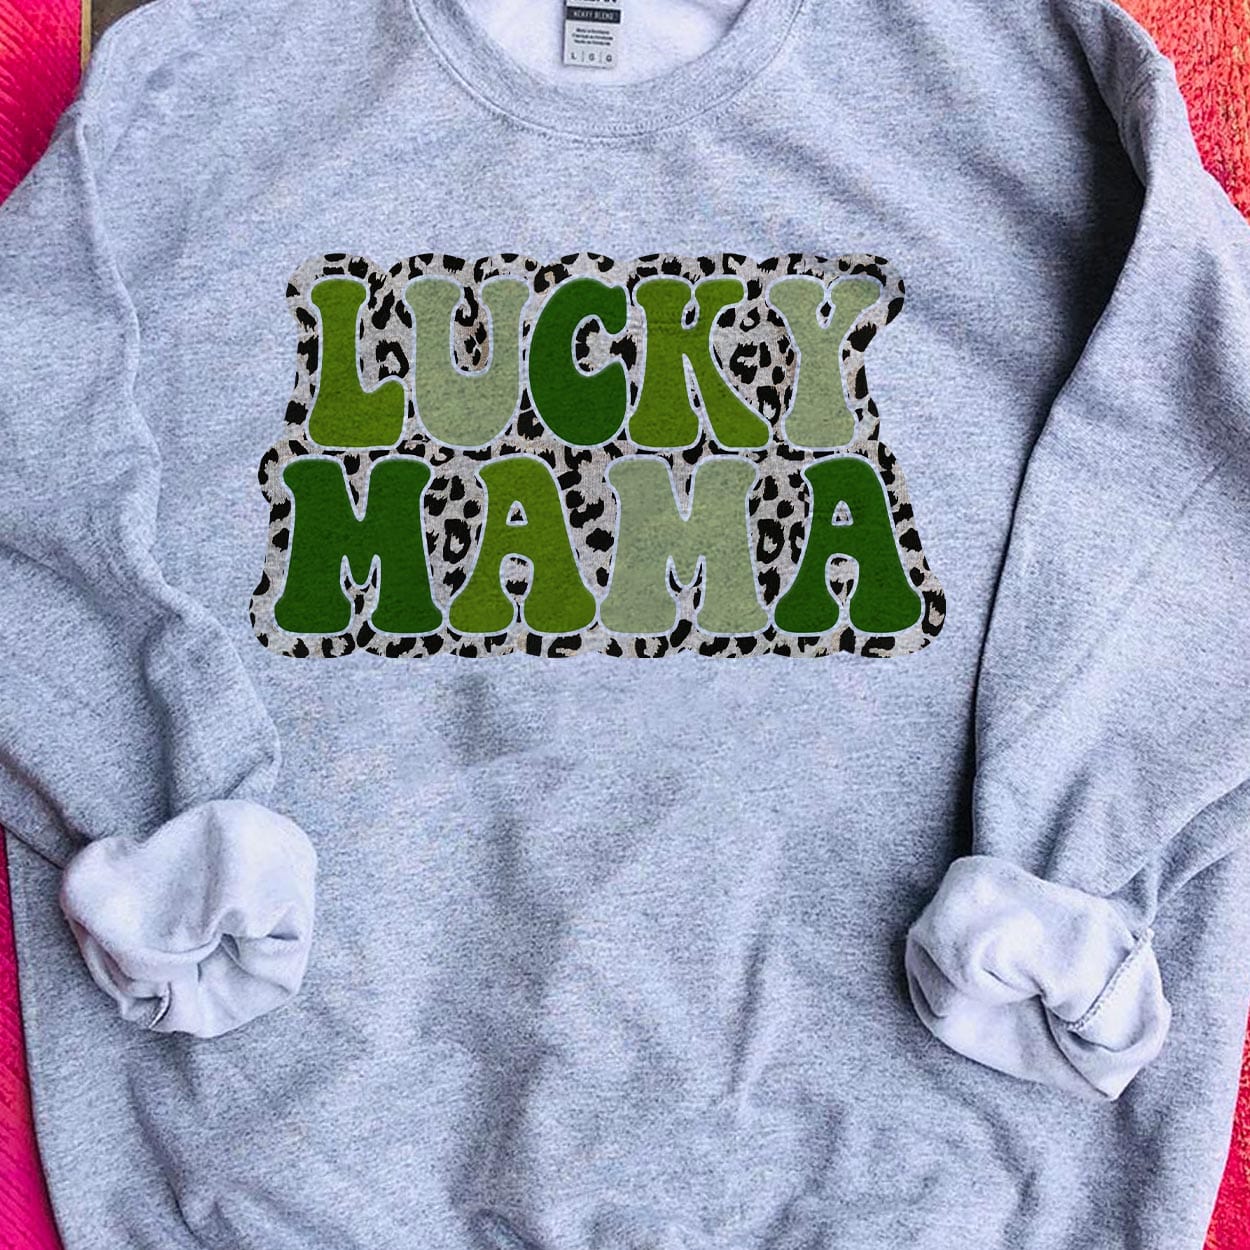 A gray crew neck sweatshirt featuring the words "Lucky mama" in various shades of green with a small leopard border around the text. Item is pictured on a pink background.